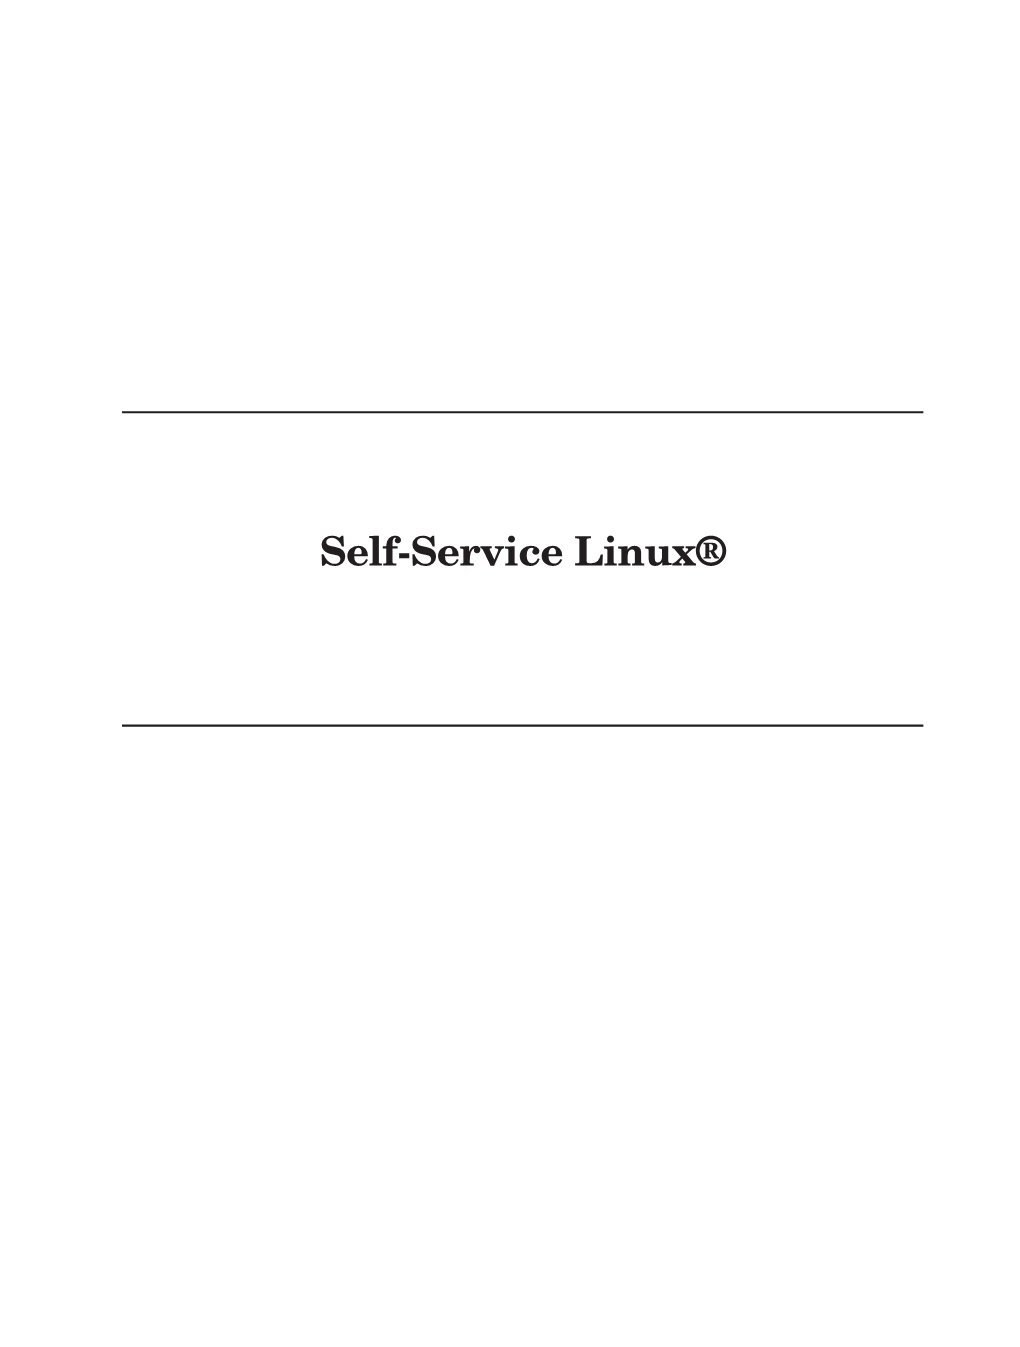 Self-Service Linux®: Mastering the Art of Problem Determination Mark Wilding and Dan Behman Self-Service Linux®